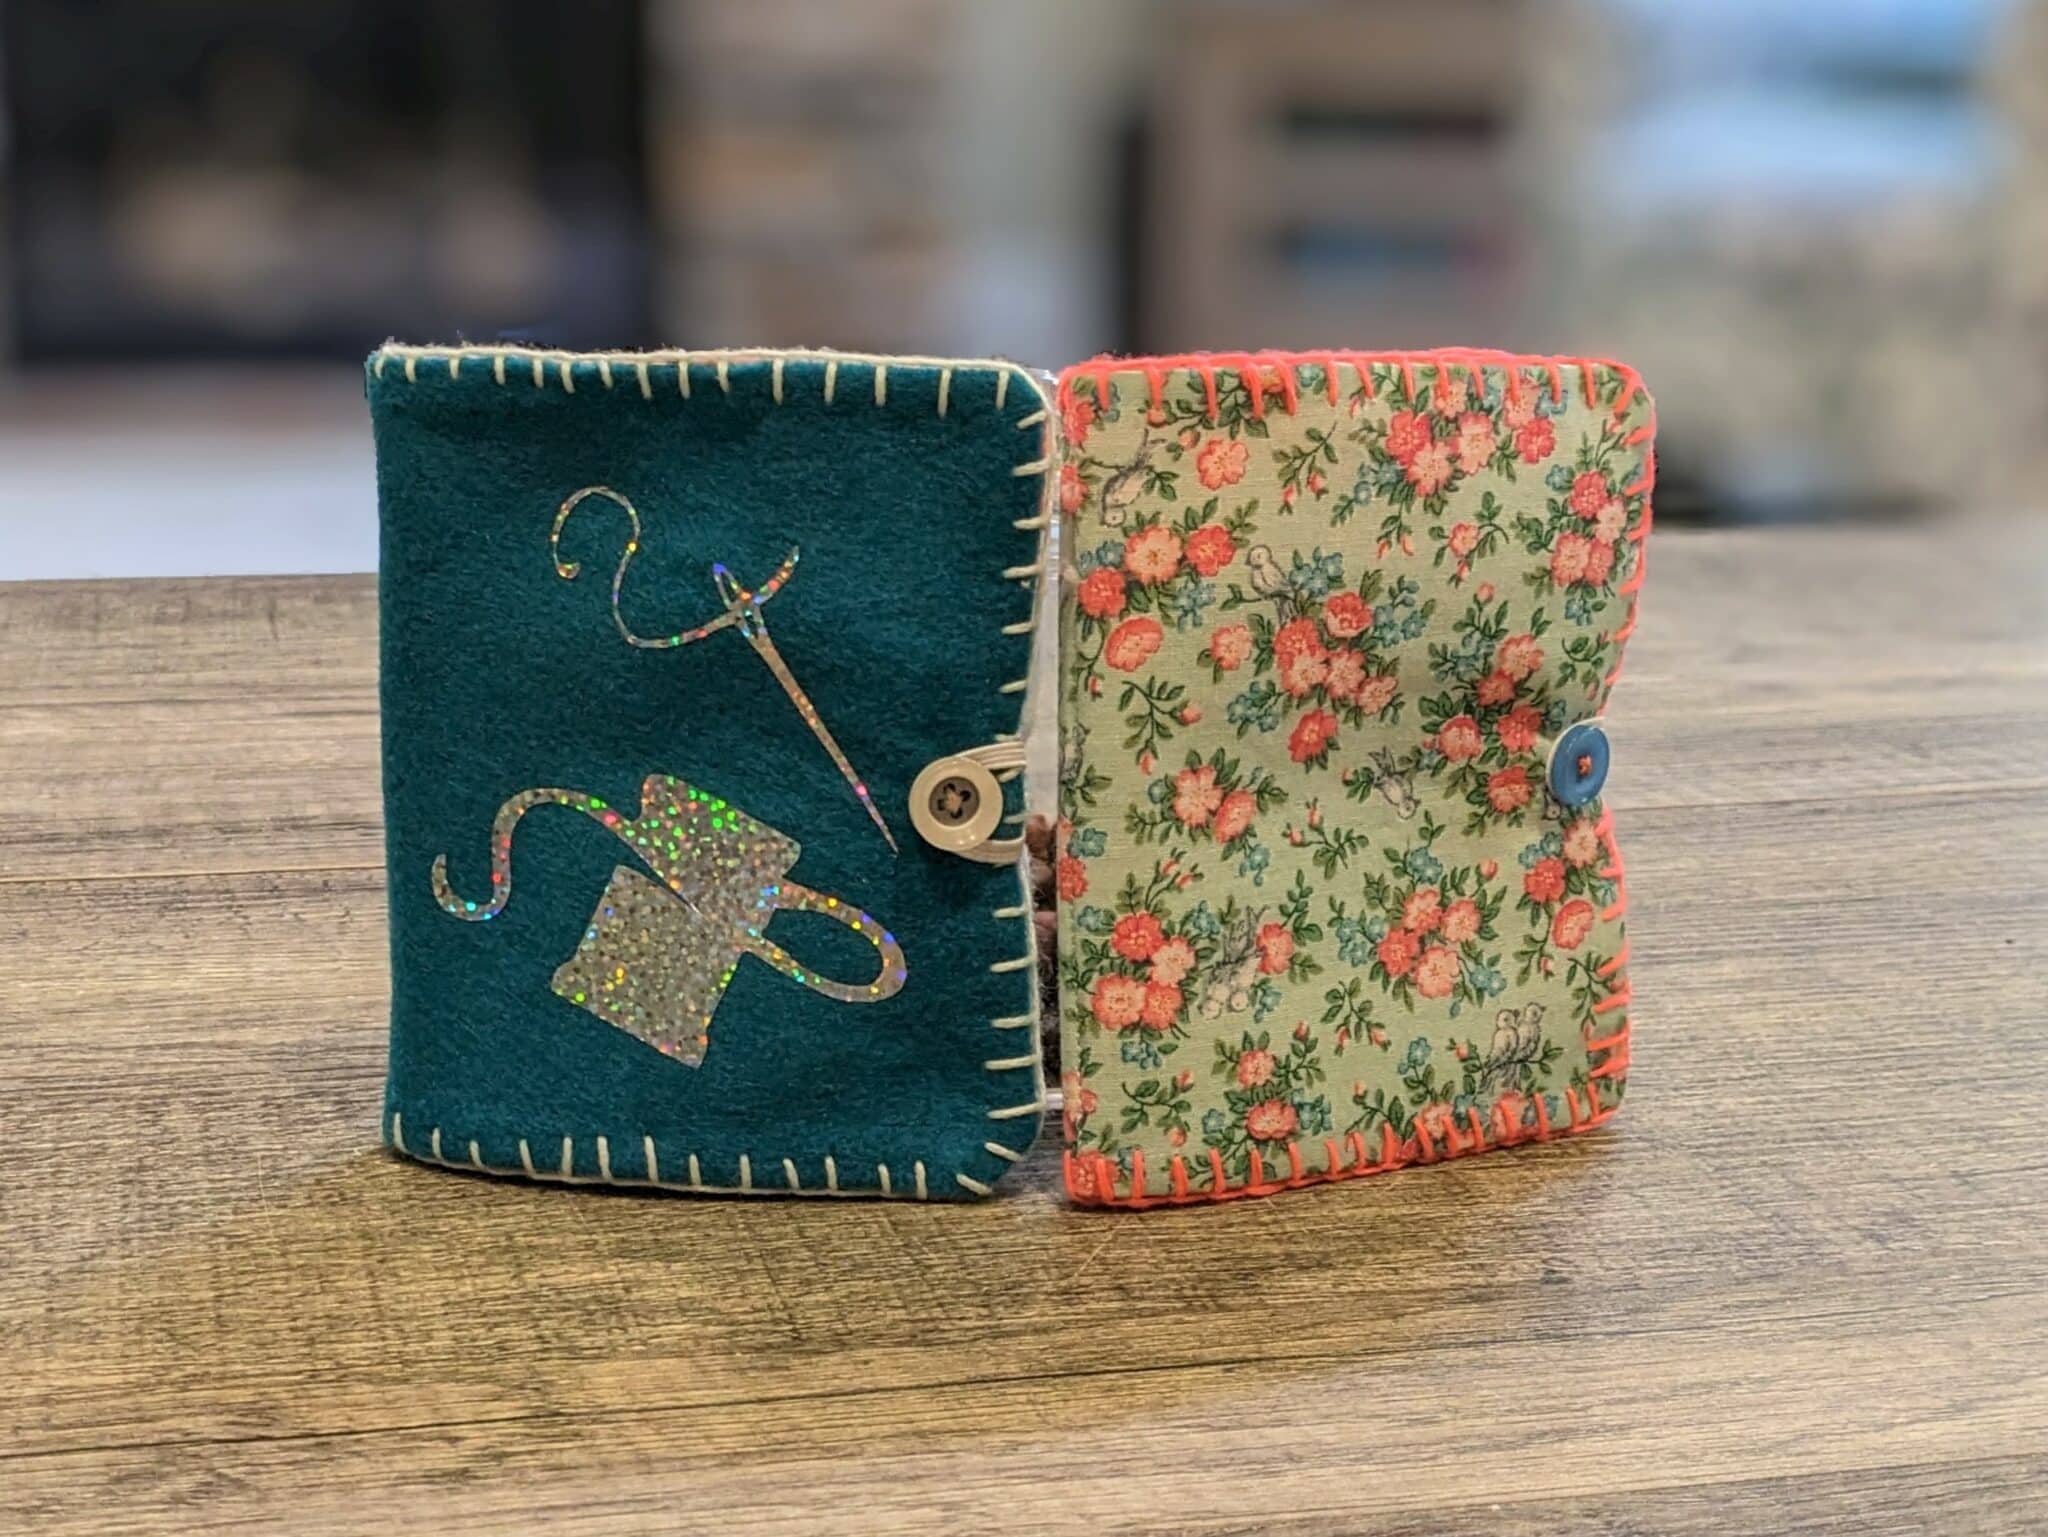 How to Make a Felt Needle Case Tutorial: Easy and Cute